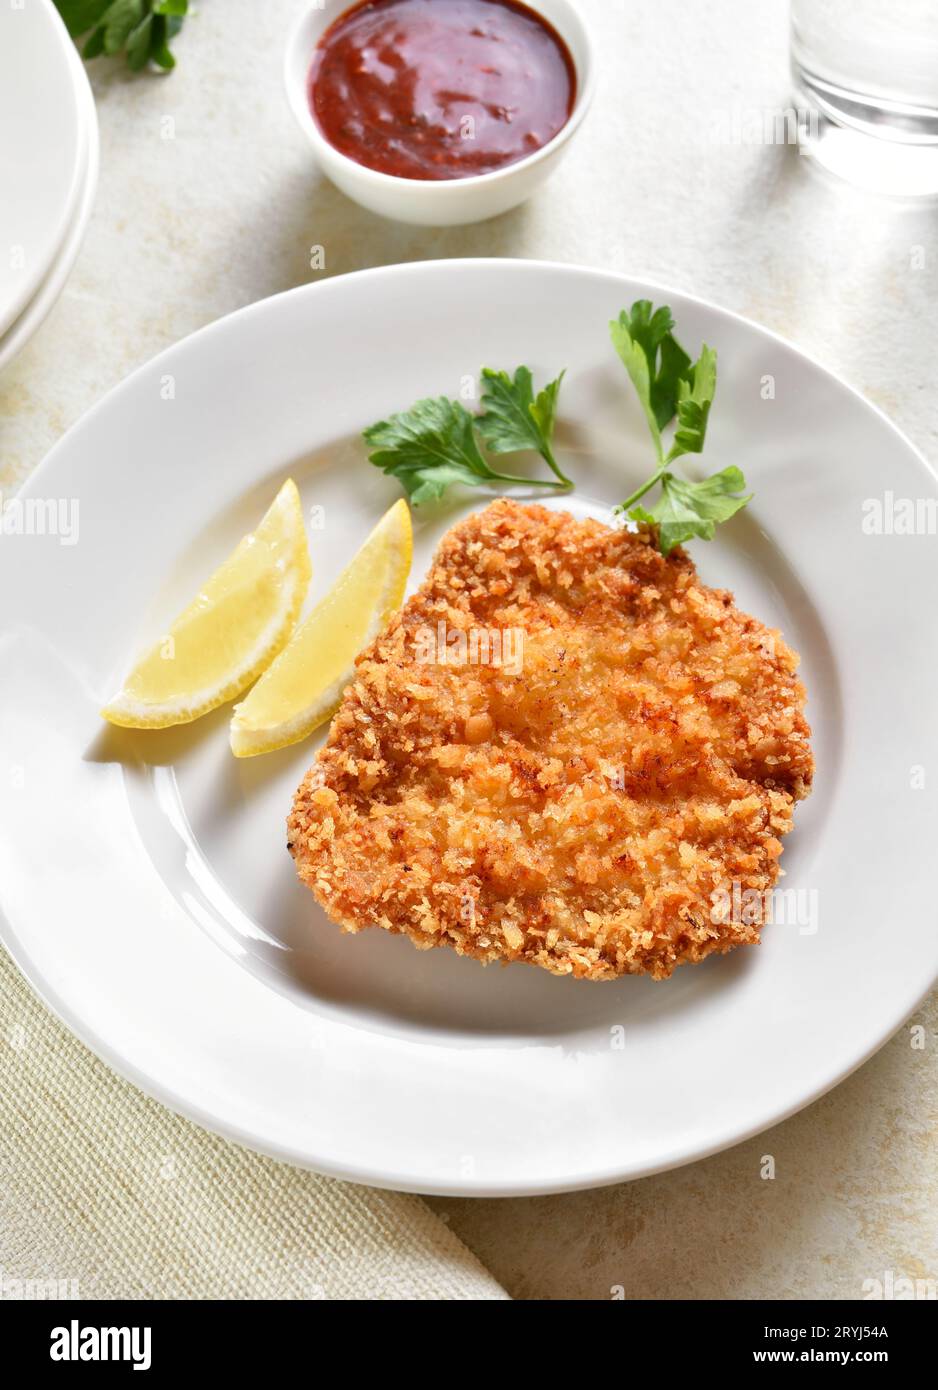 Homemade breaded chicken schnitzel on plate over light stone background. Close up view Stock Photo